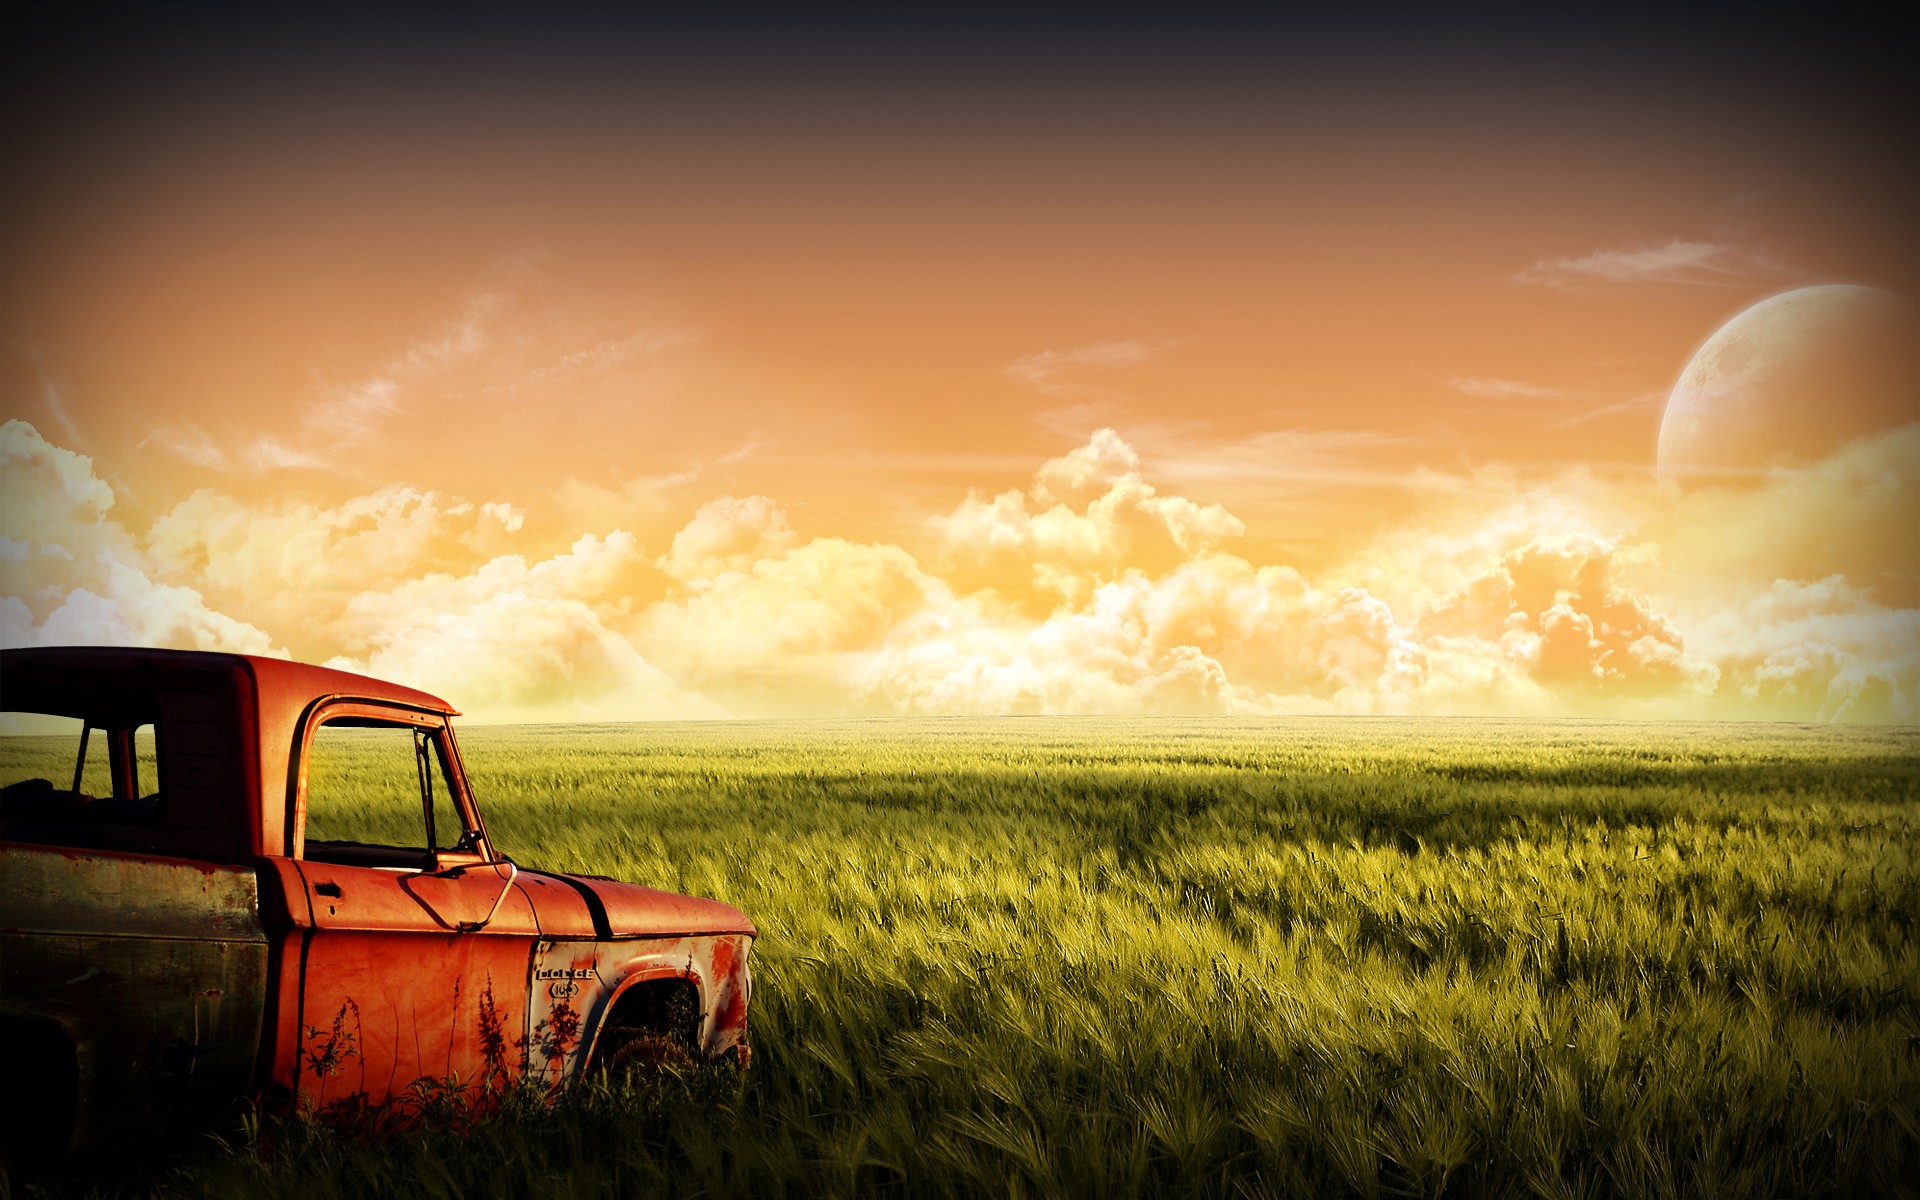 General 1920x1200 old car nature landscape red green Moon photo manipulation car field sunset grass clouds sky space art planet wreck vehicle red cars plants space horizon digital art